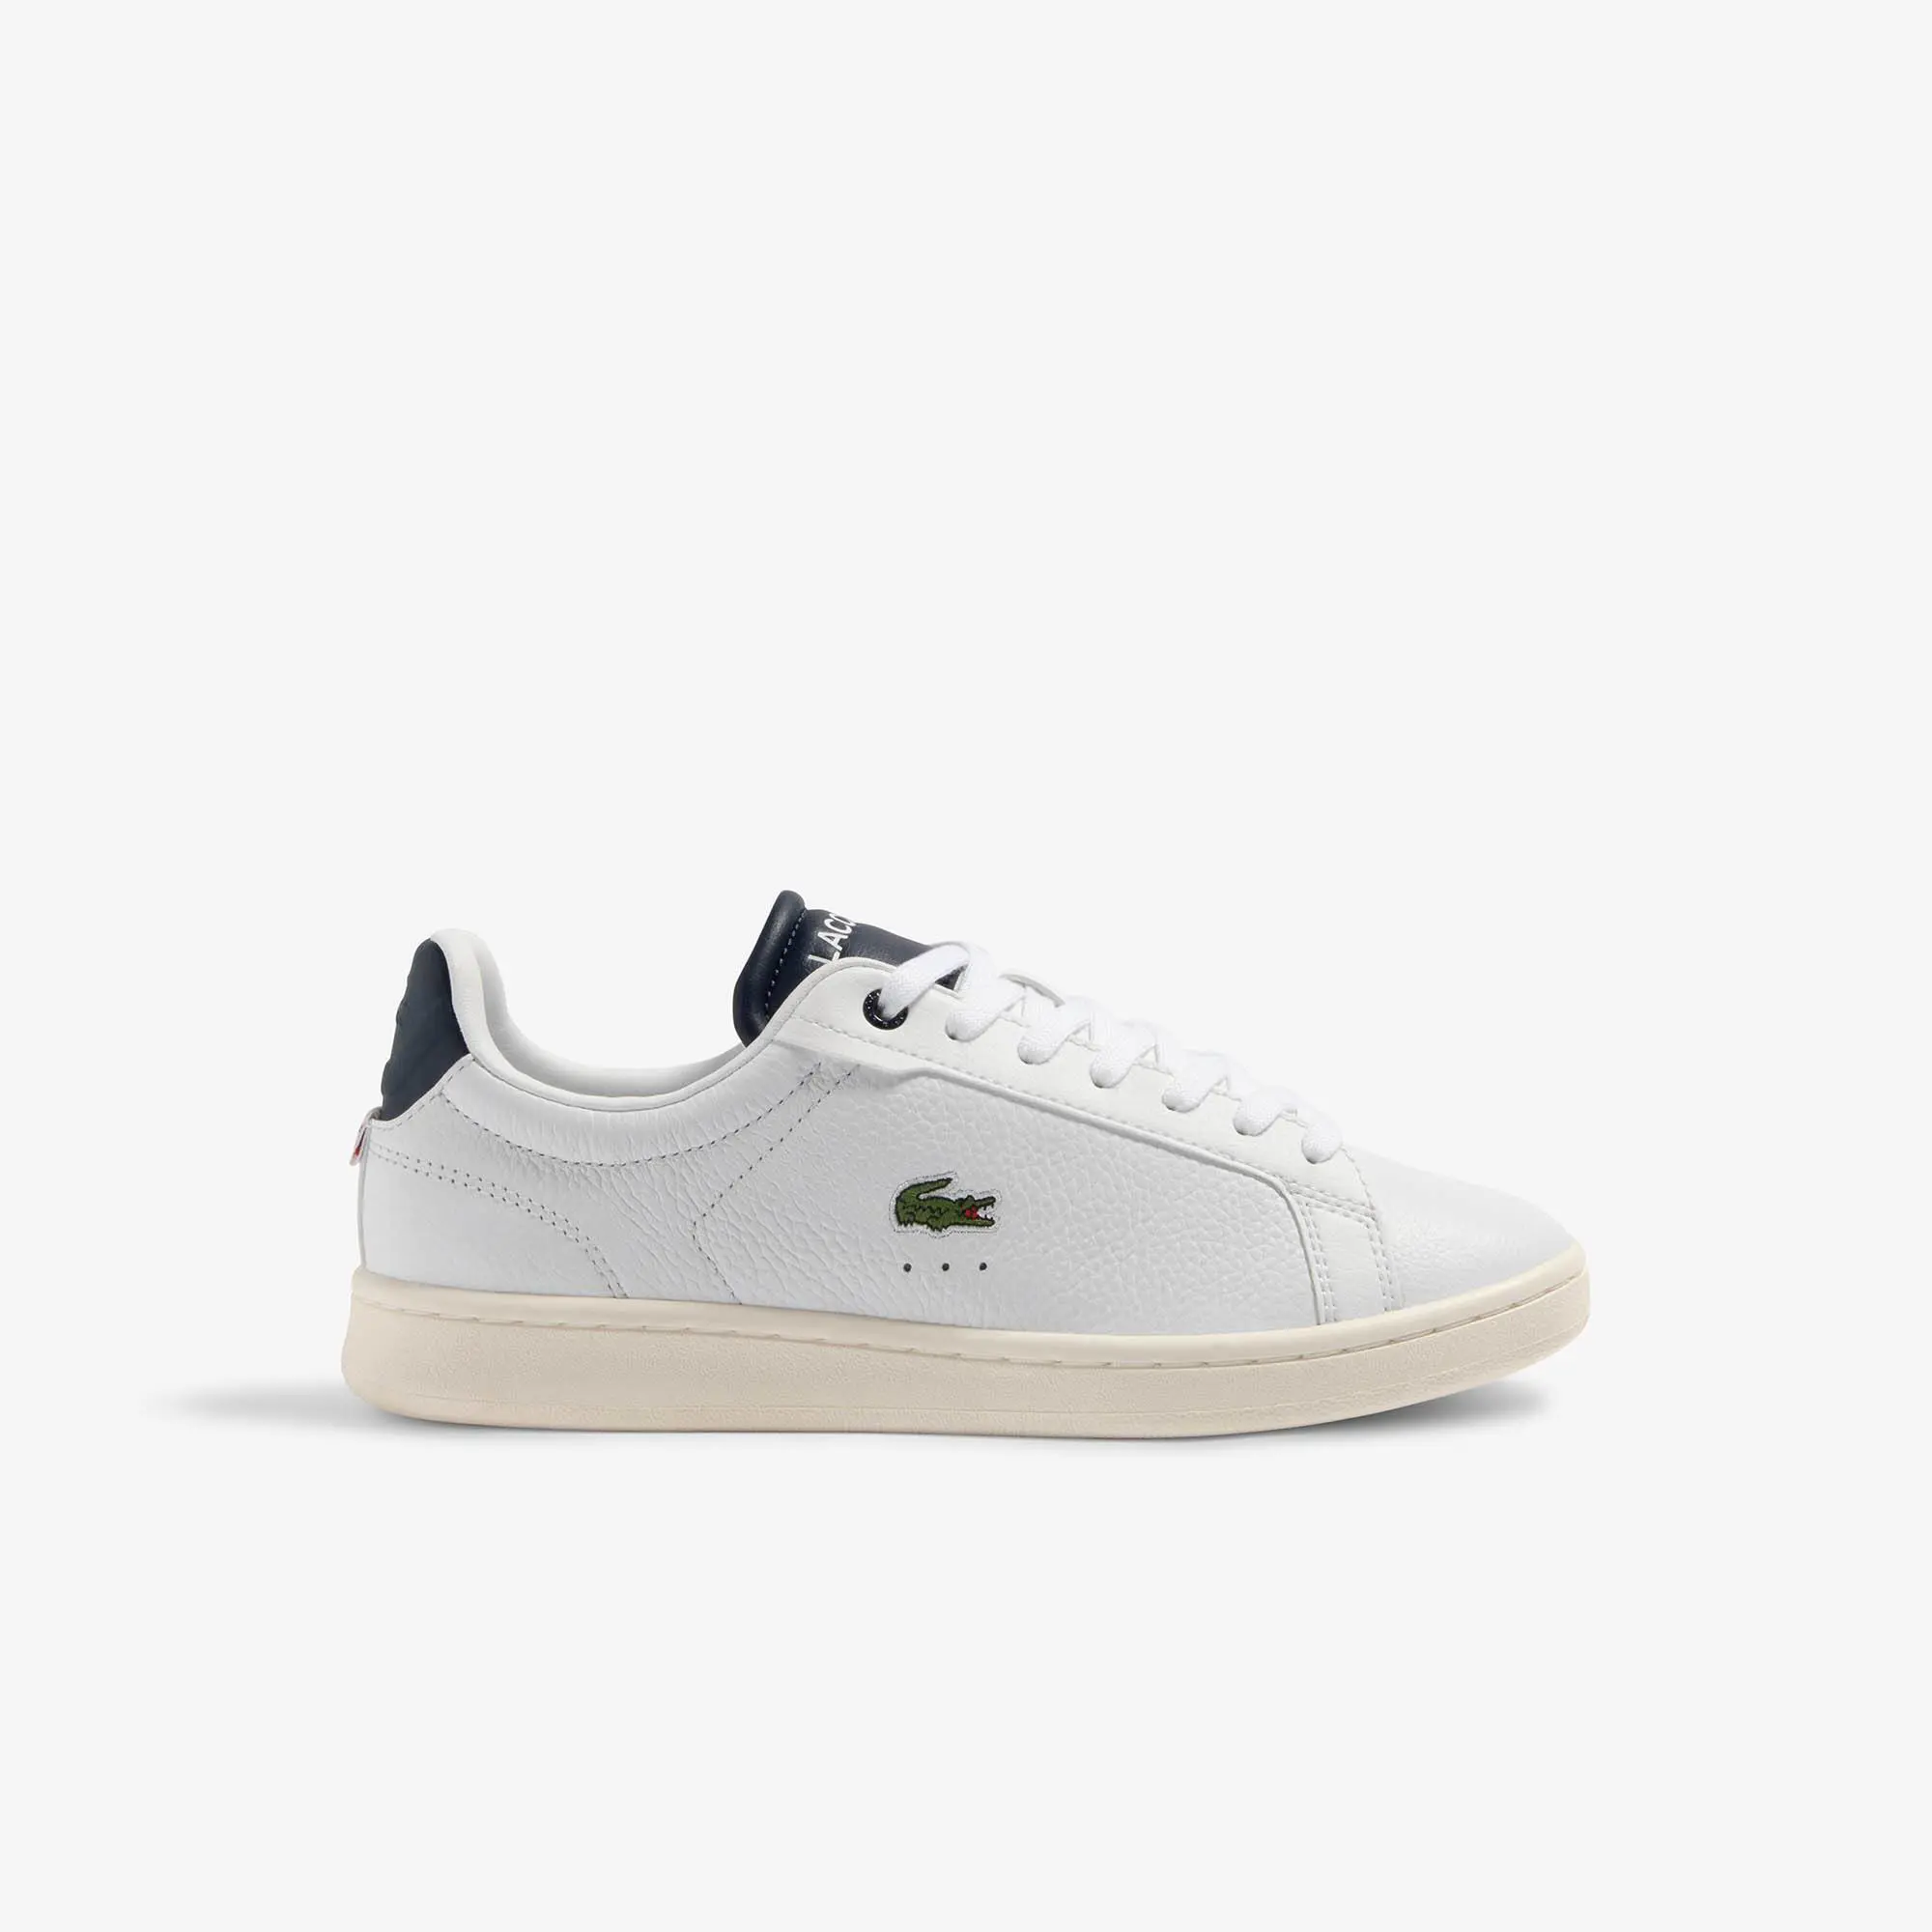 Lacoste Women's Carnaby Pro Colourblock Leather Trainers. 1